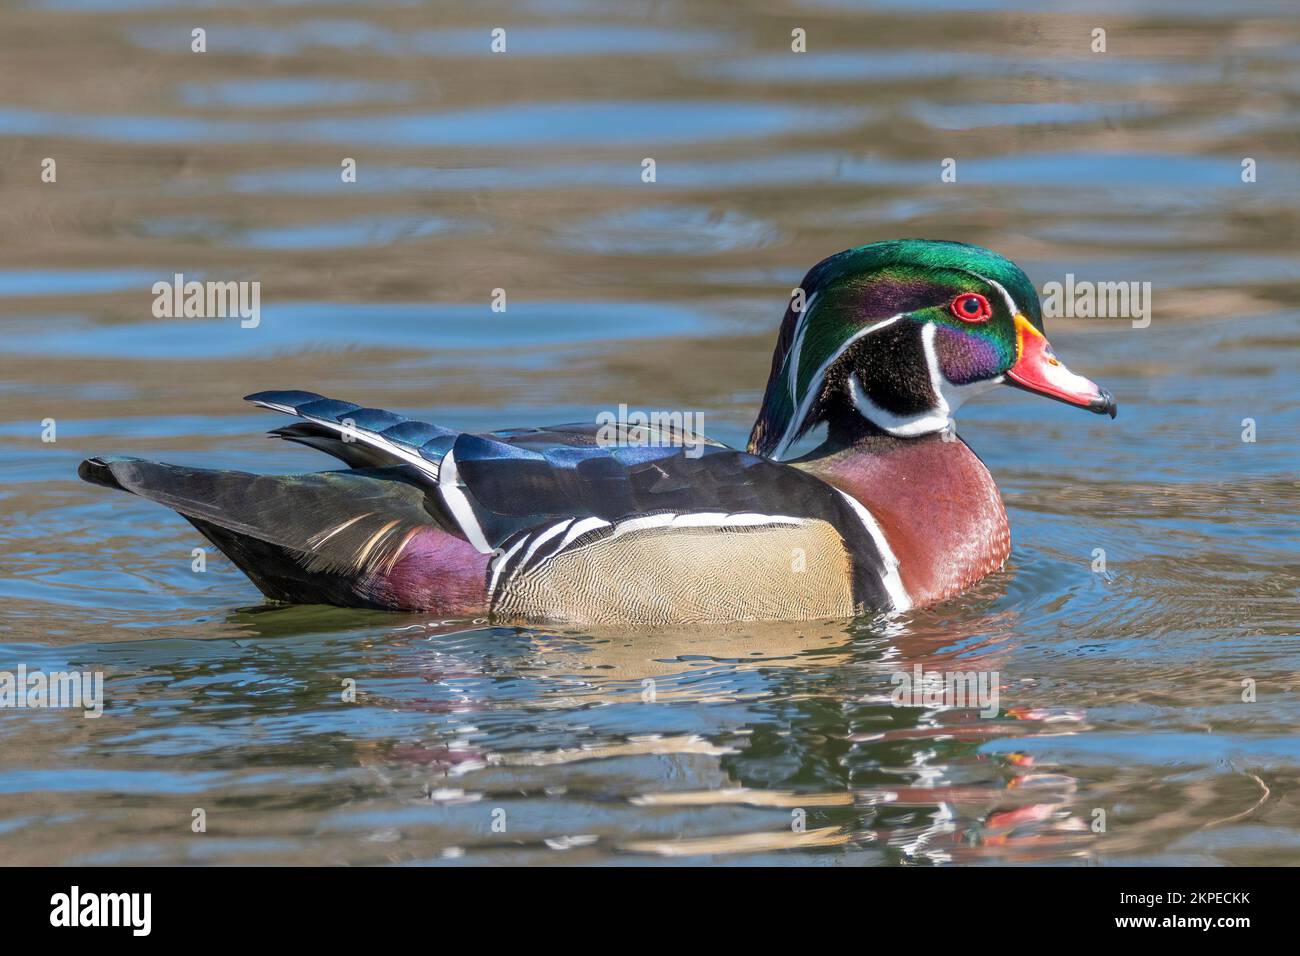 A male wood duck with beautiful, colorful breeding plumage swims along a lake Stock Photo